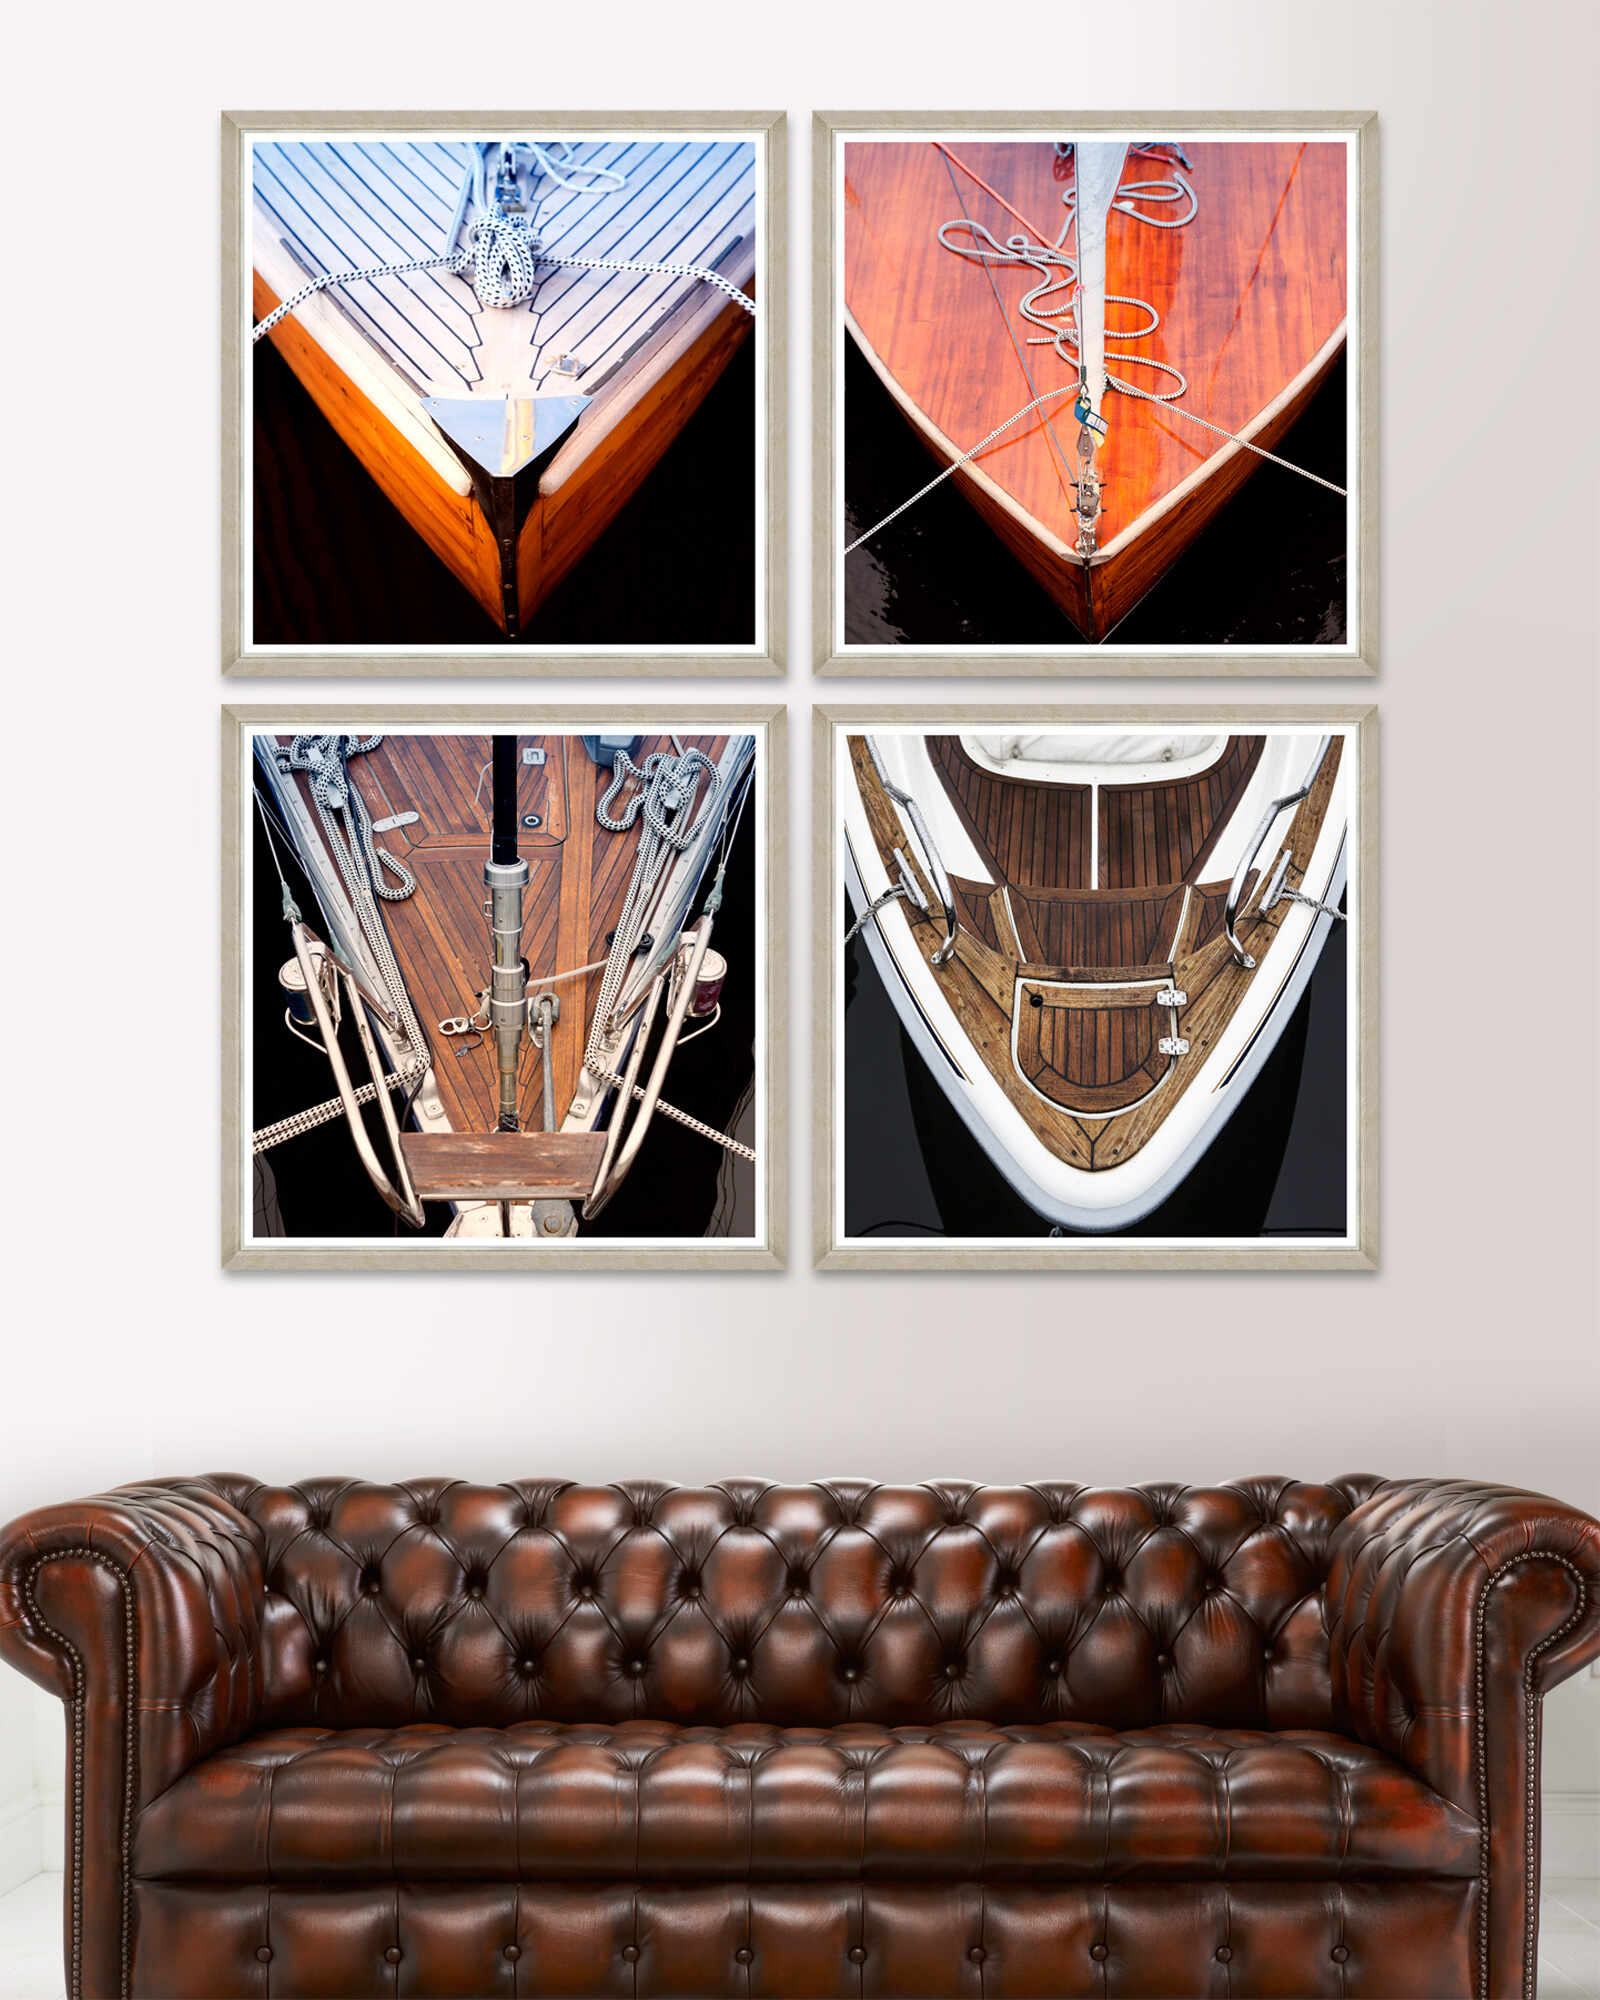 Tablou 4 piese Framed Art Wood Boat Fronts